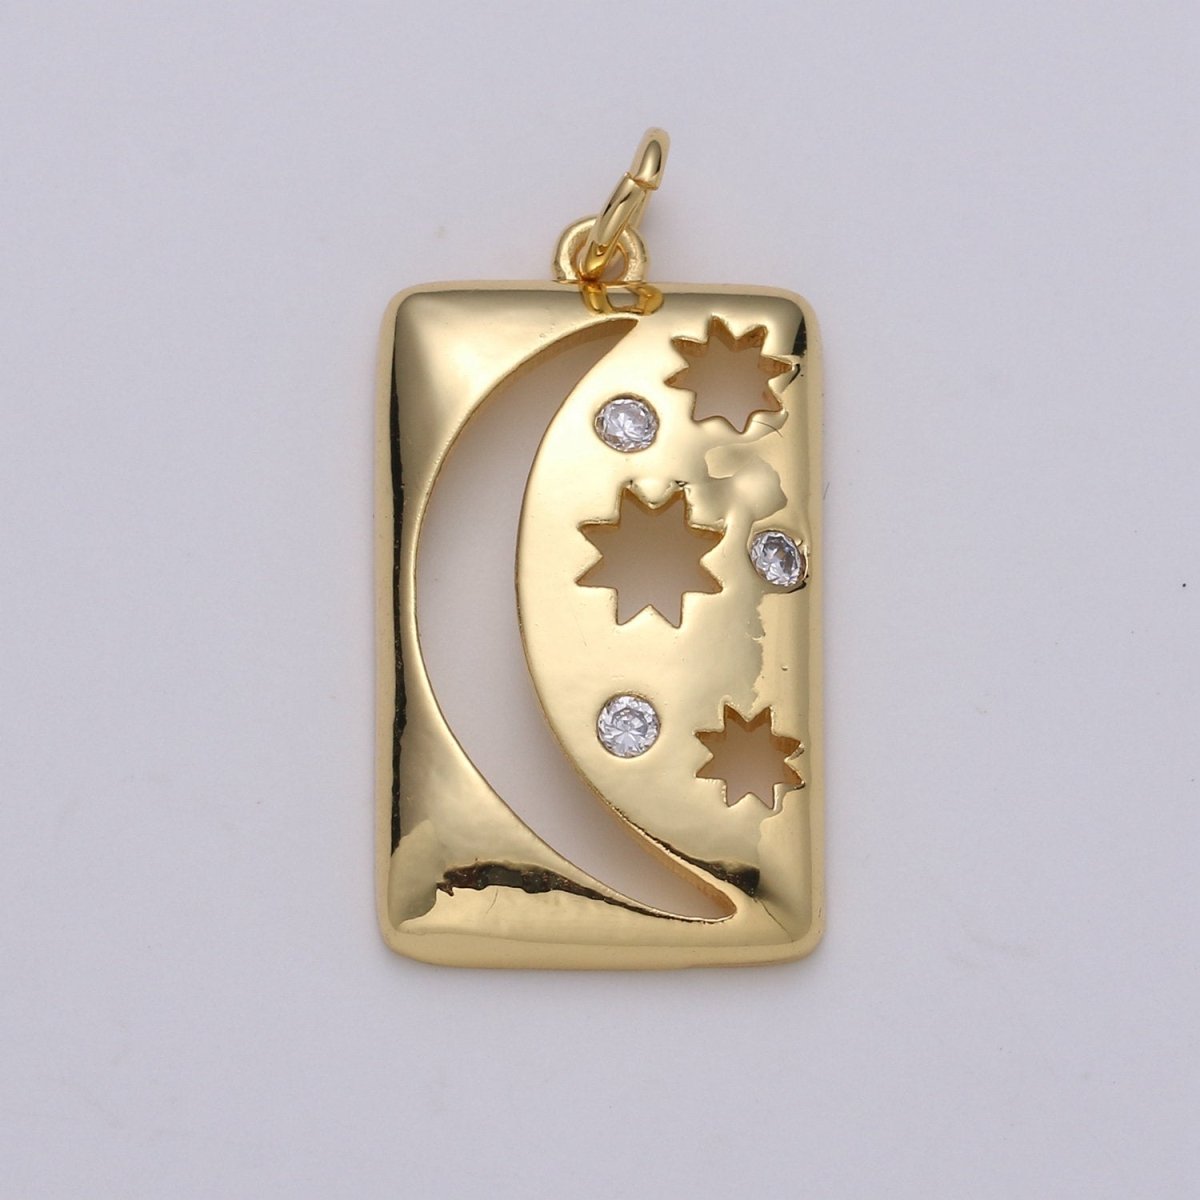 Celestial Jewelry Gold Crescent Moon Charm Star Tag Charm Jewelry Making Supply 24K Gold Filled Findings D-415 D-416 - DLUXCA